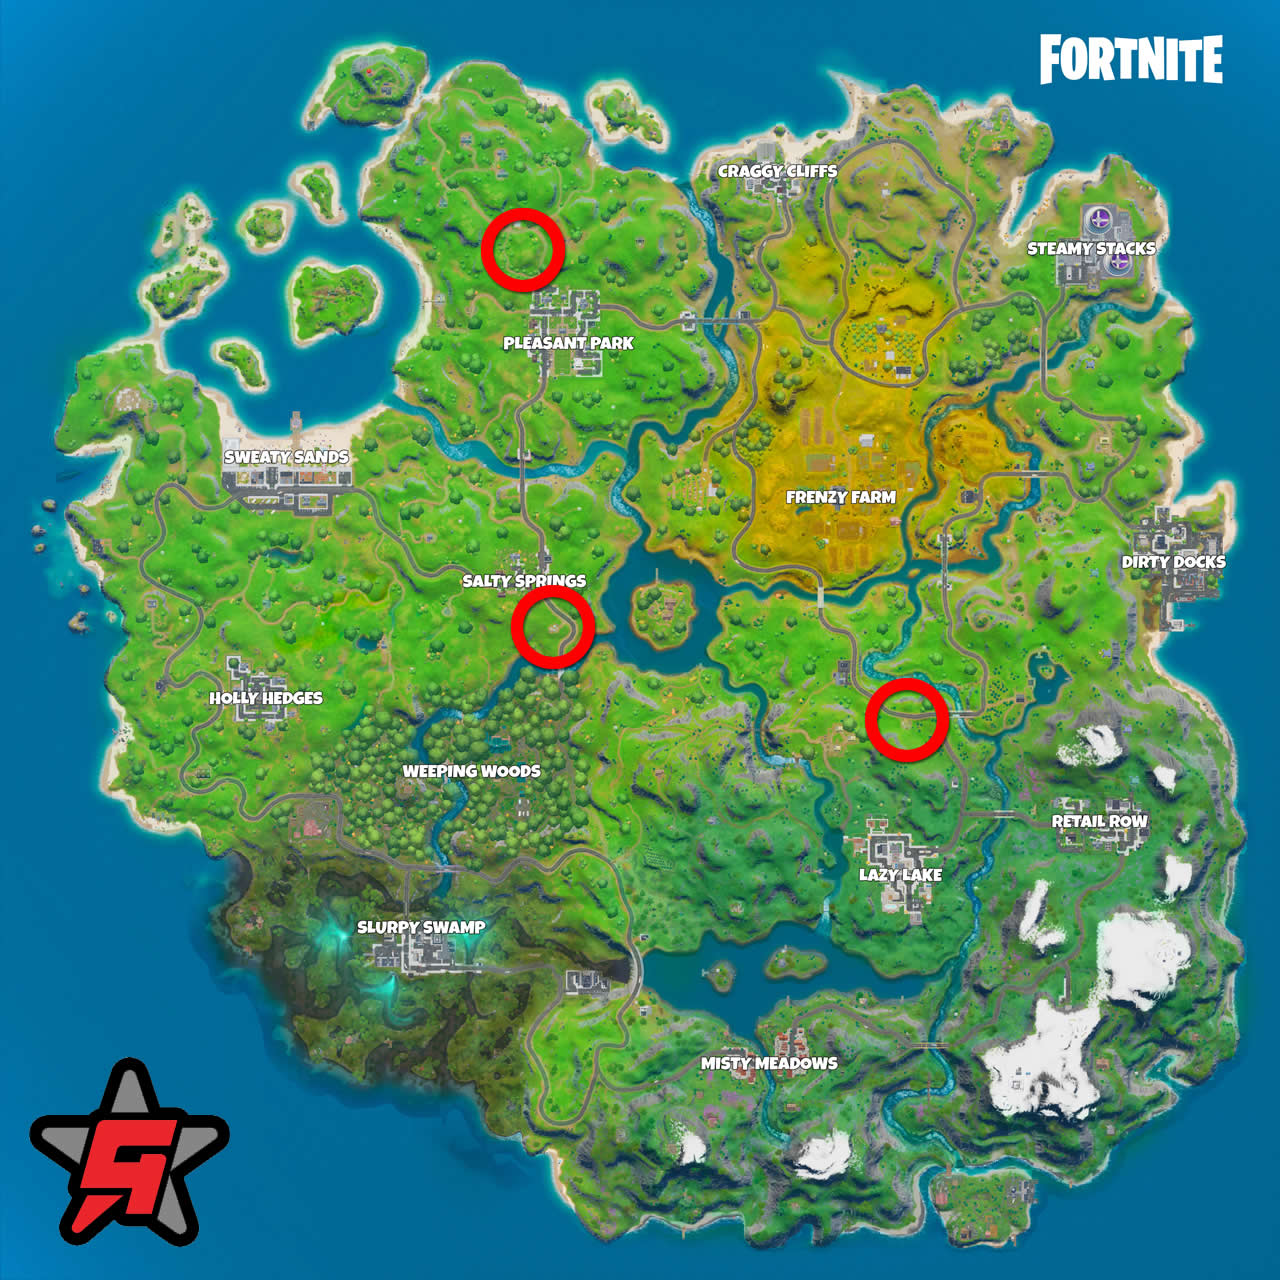 Fortnite Food Trucks | Locations and Map - GameRevolution